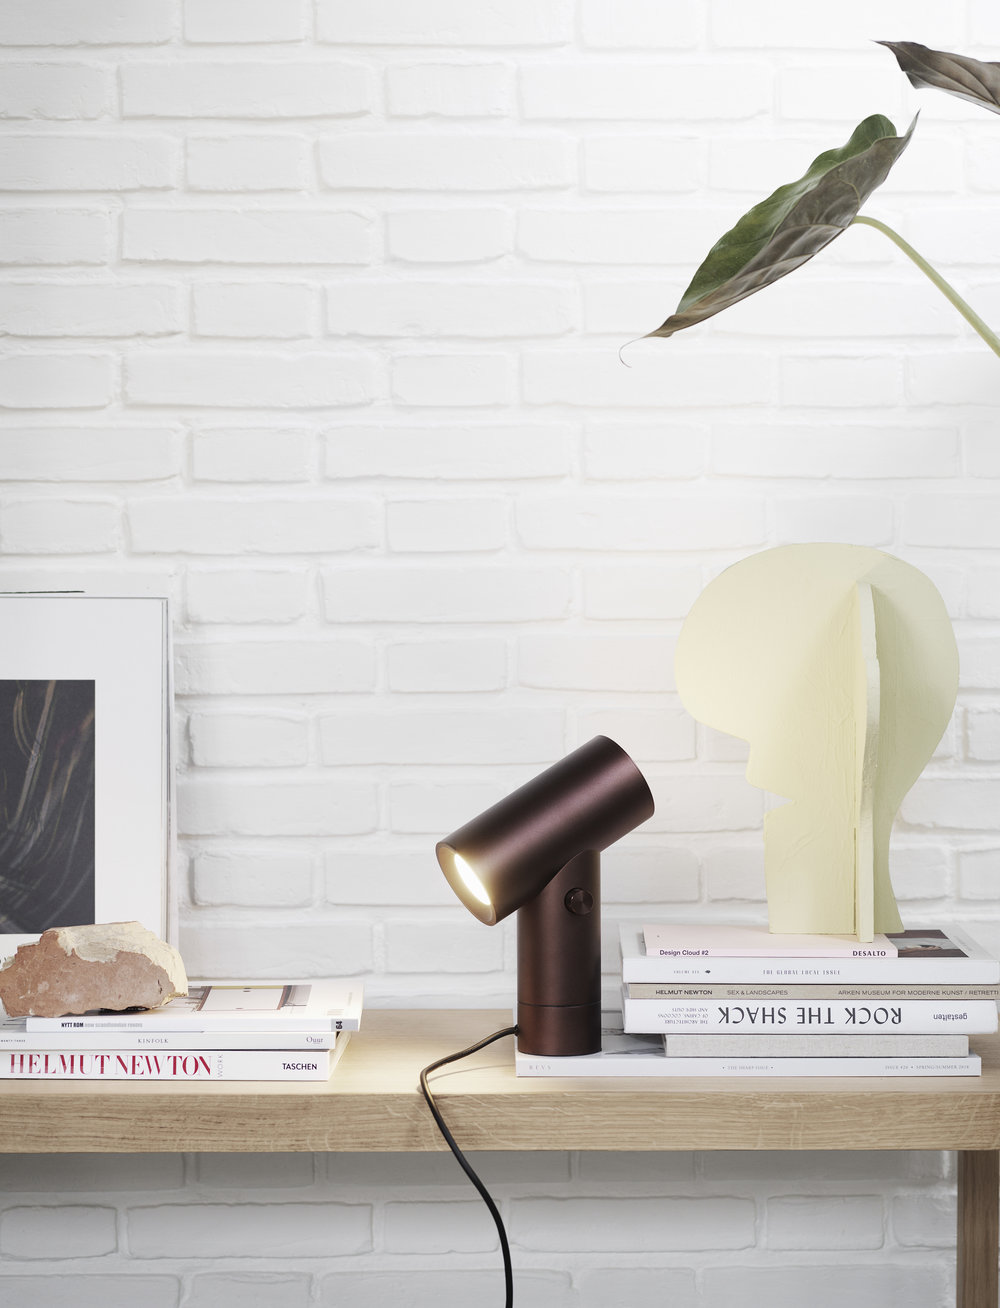  New lamp from Muuto which can shine up, down, or both simaltaneously - and it can swivel, too! 